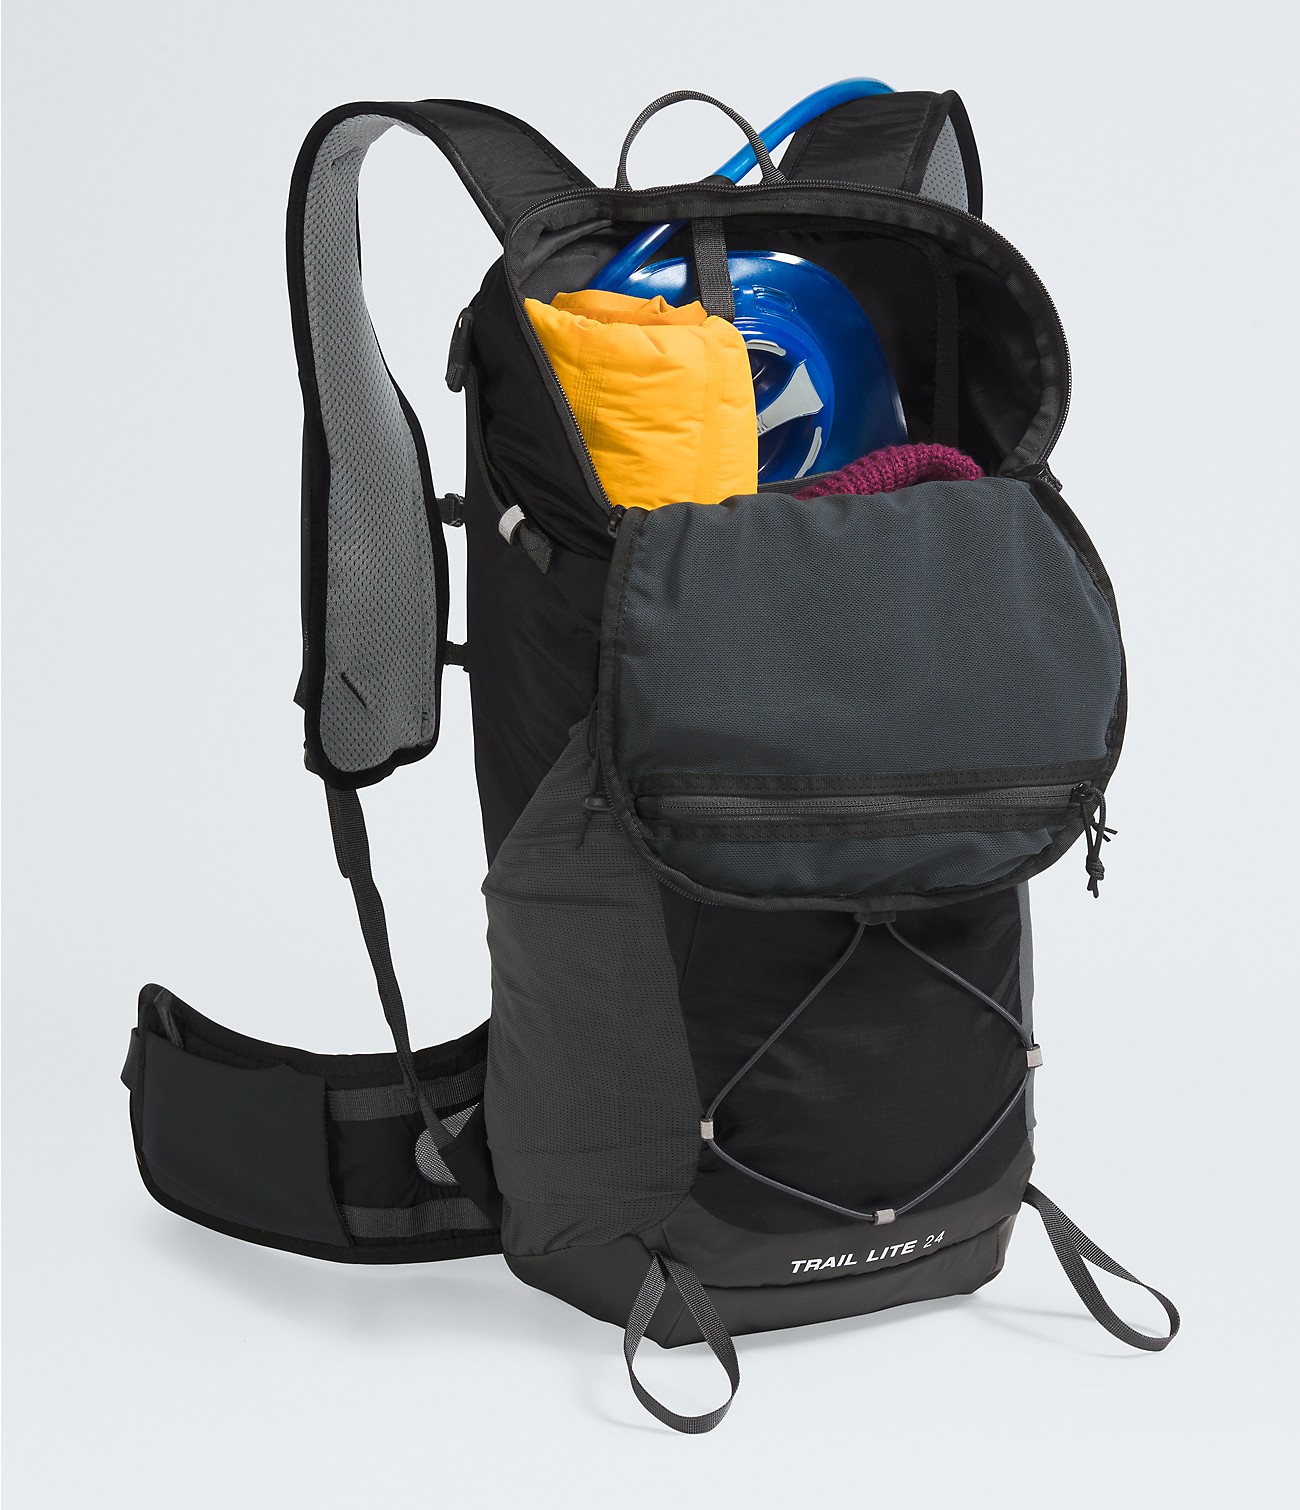 Trail Lite 24 Backpack | The North Face